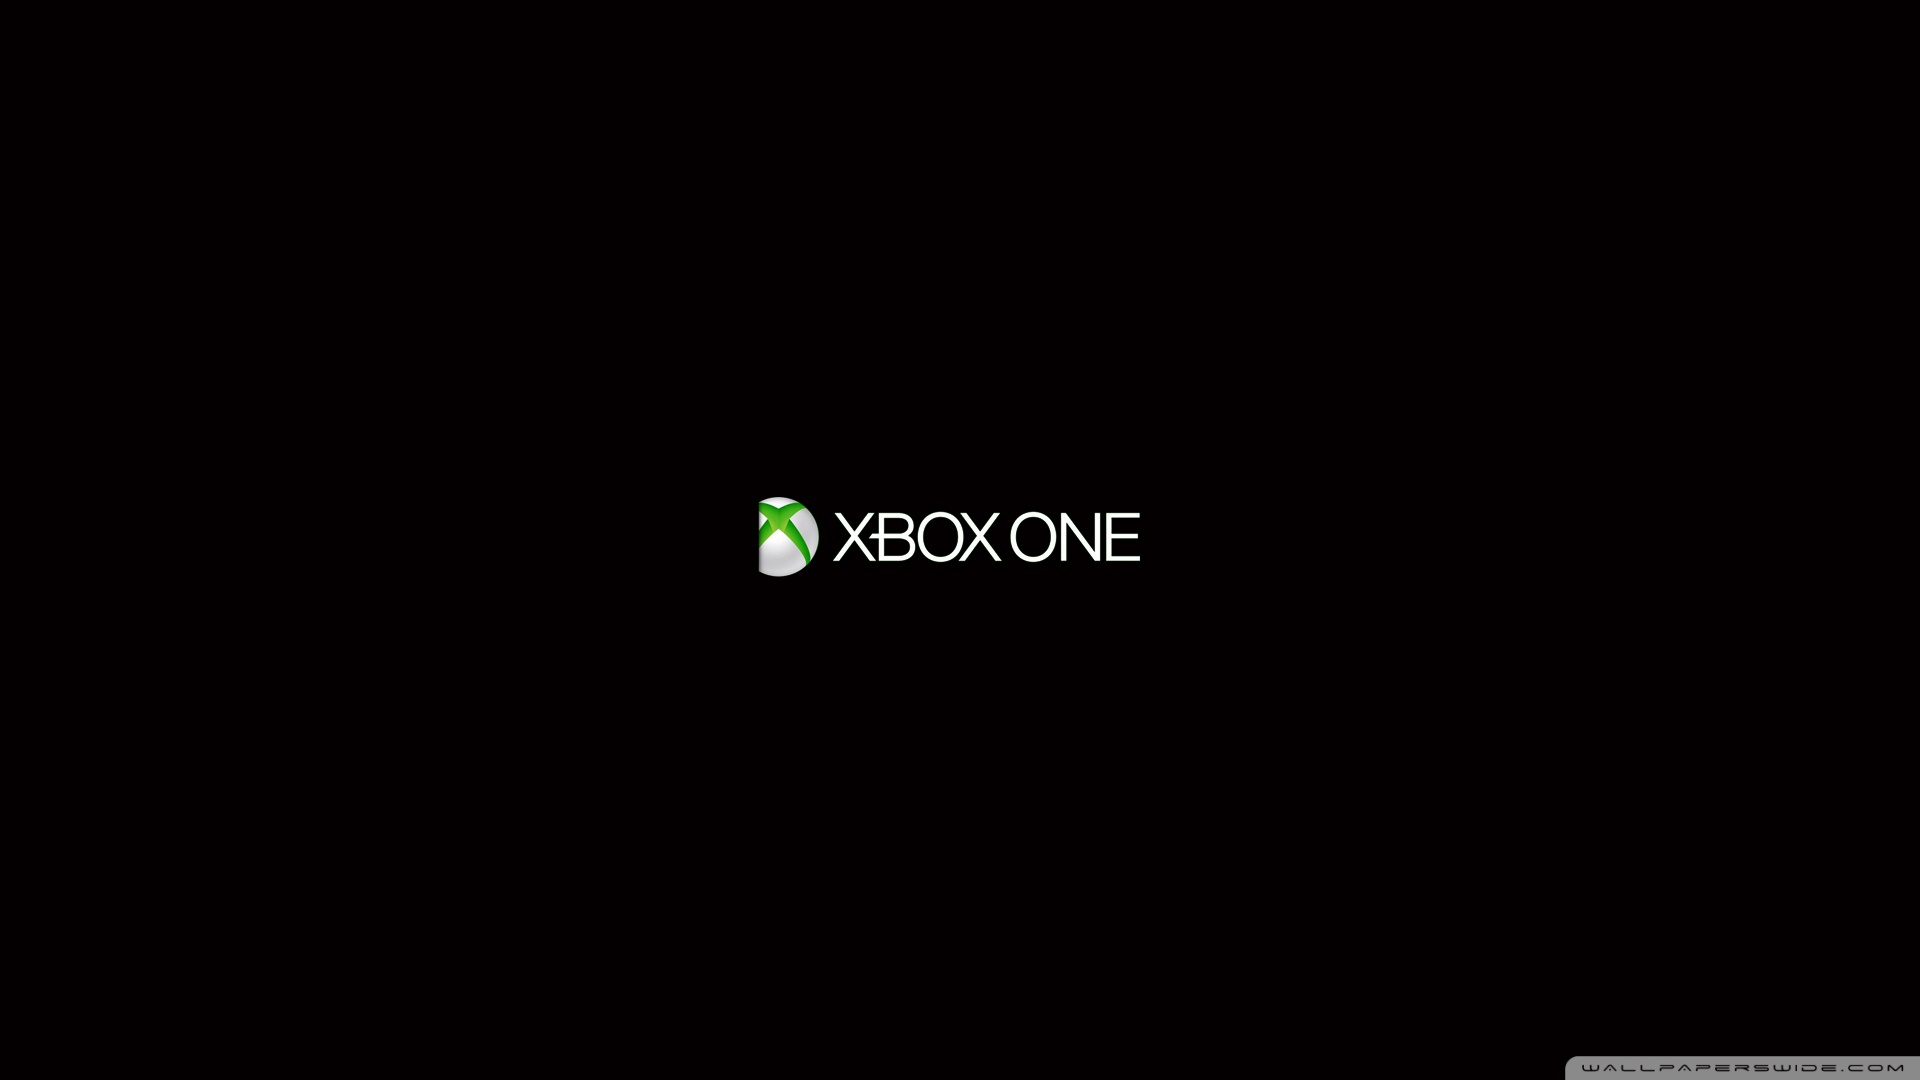 Xbox One Wallpaper In 1080p